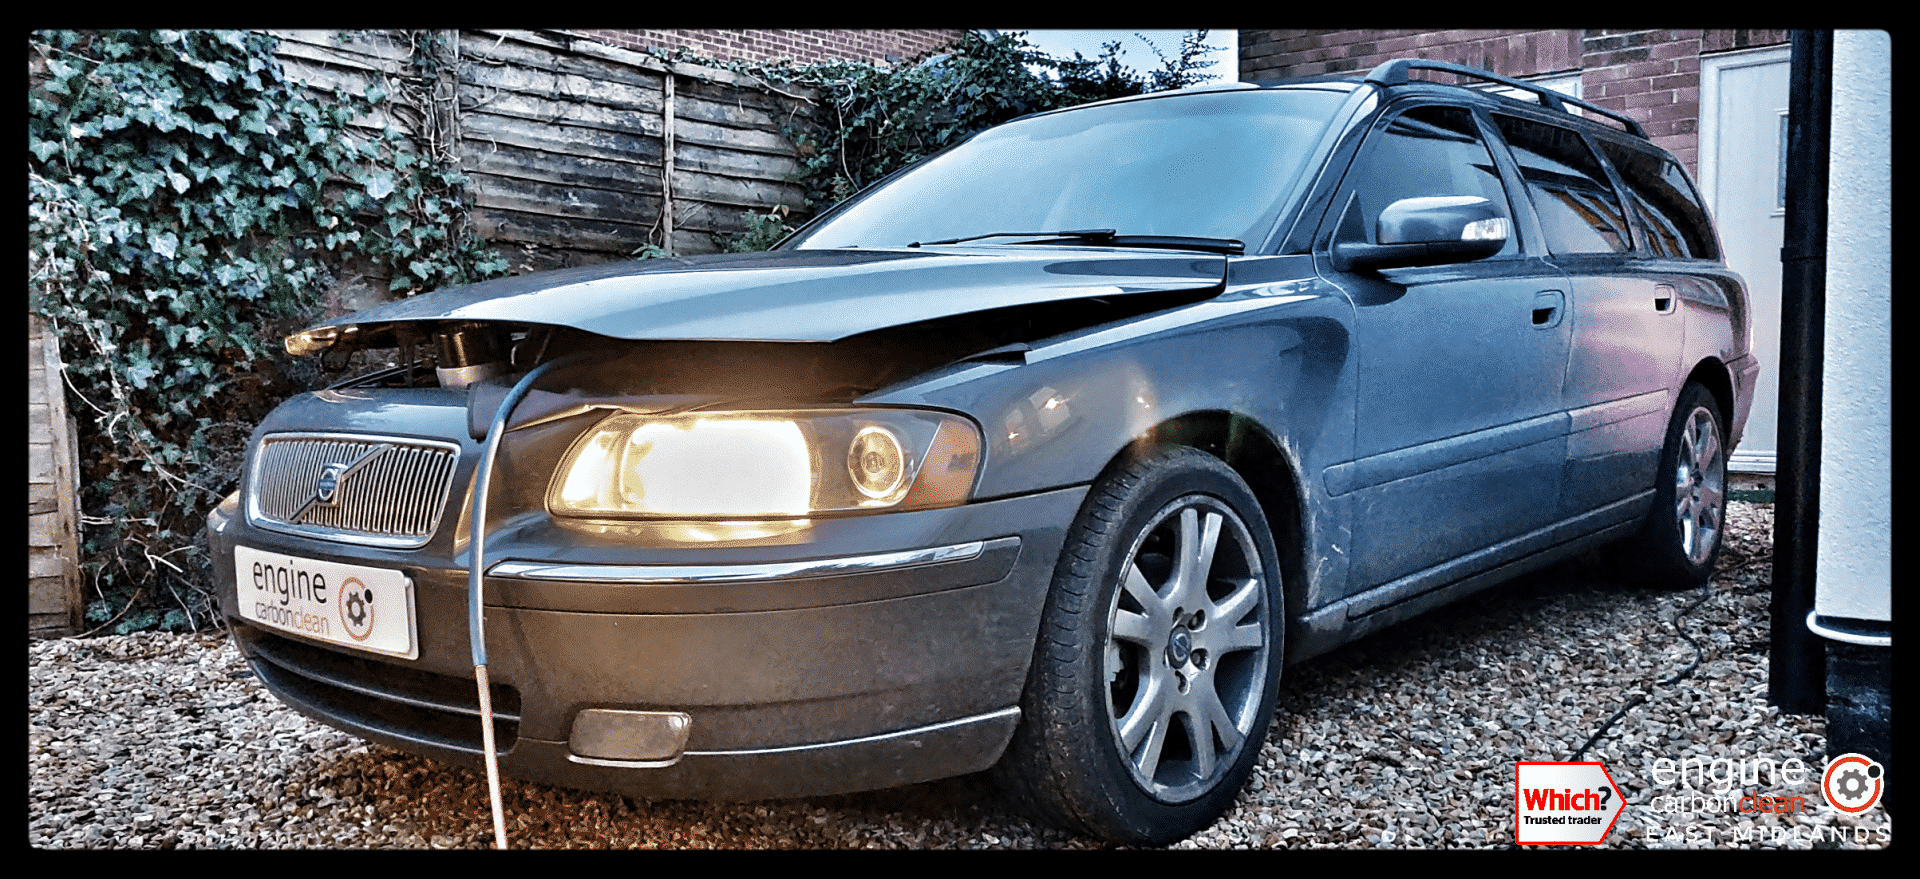 Diagnostic Consultation and Engine Carbon Clean - Volvo V70 D5 (2007 - 160,692 miles)